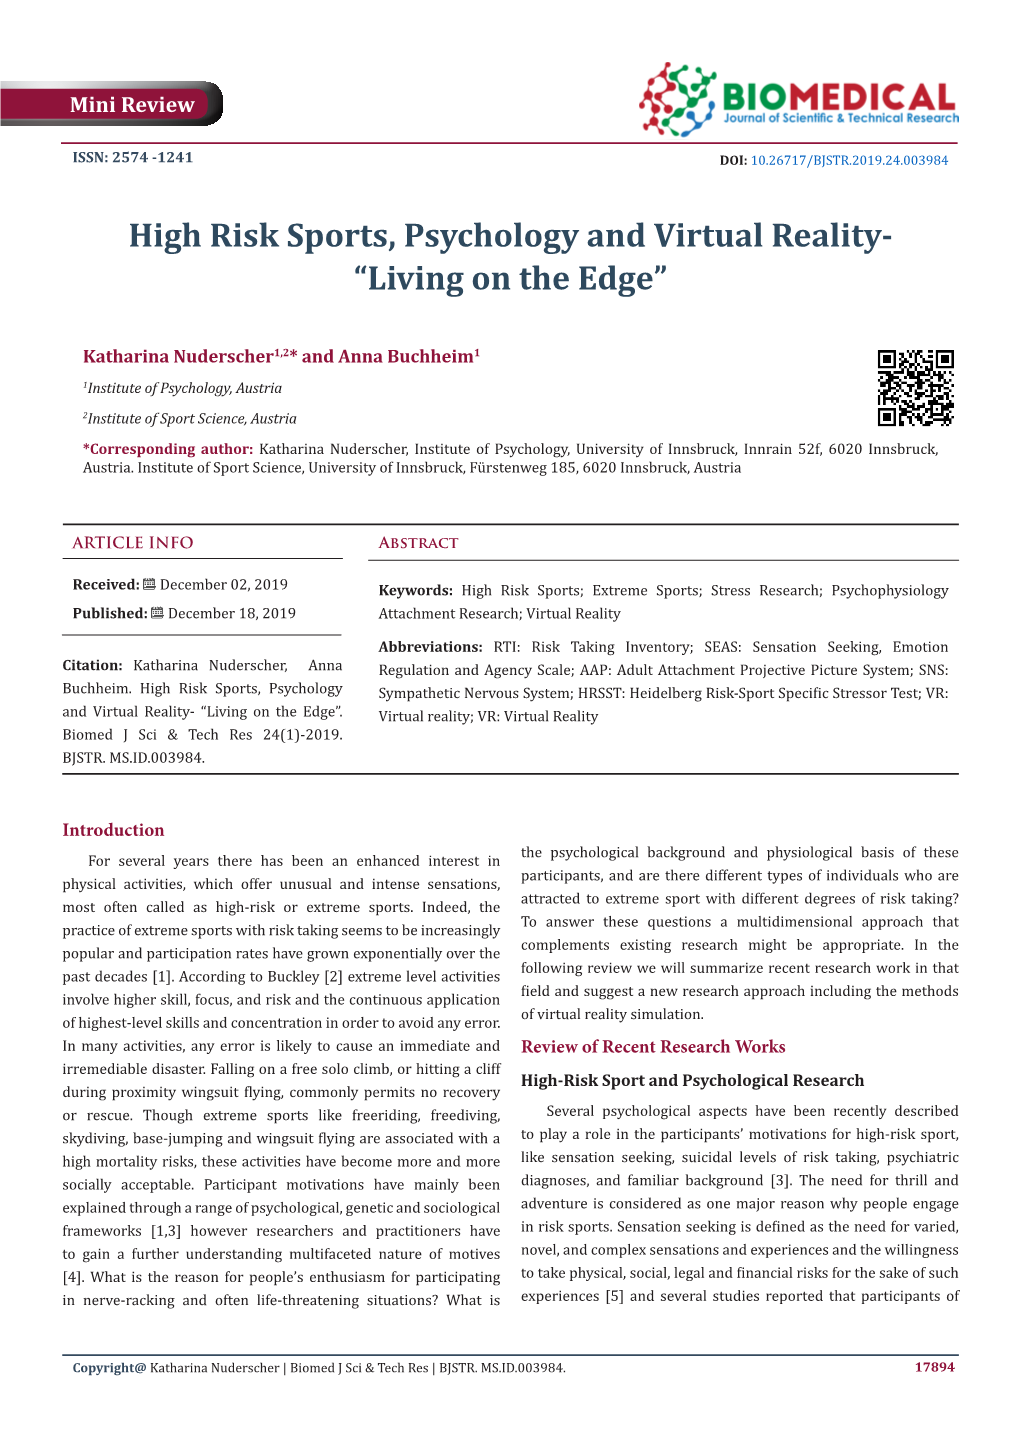 High Risk Sports, Psychology and Virtual Reality- “Living on the Edge”